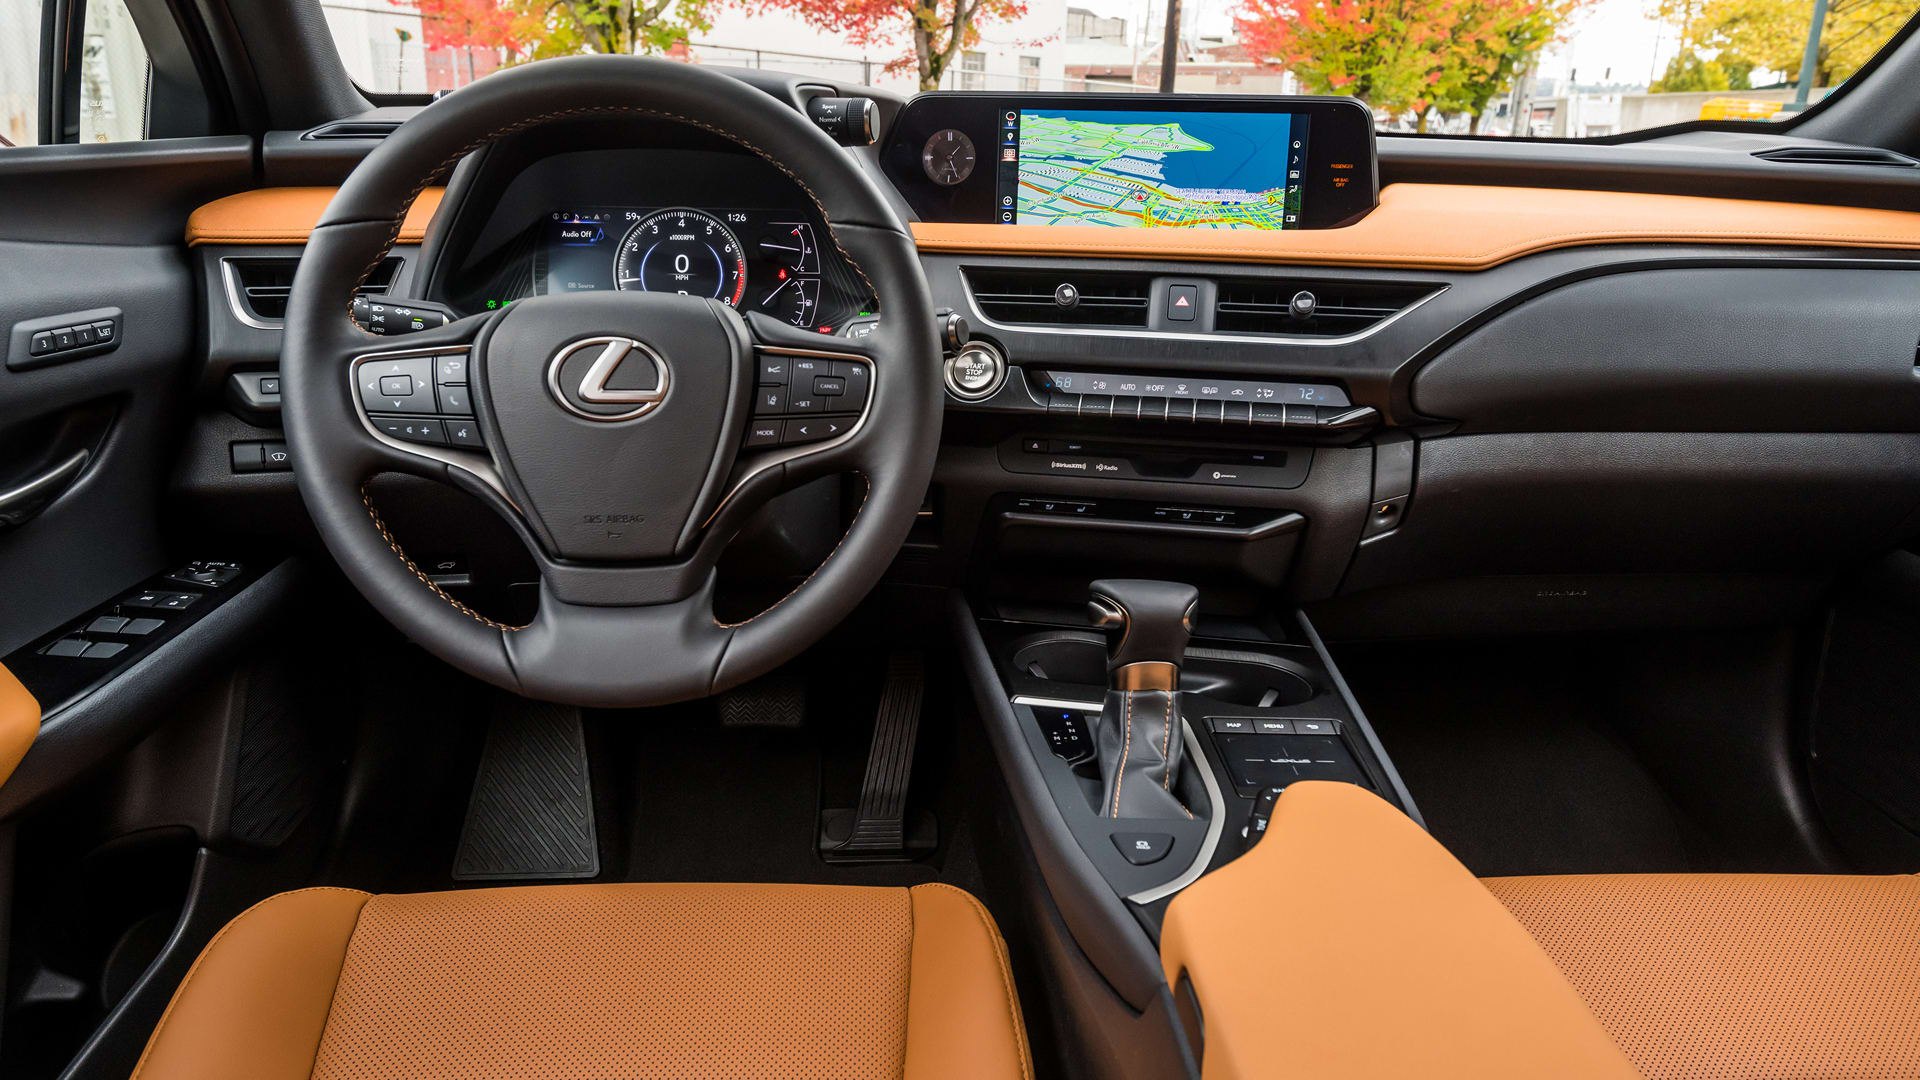 2019 Lexus UX 200 and UX 250h Reviews | Price, specs, features and photos -  Autoblog